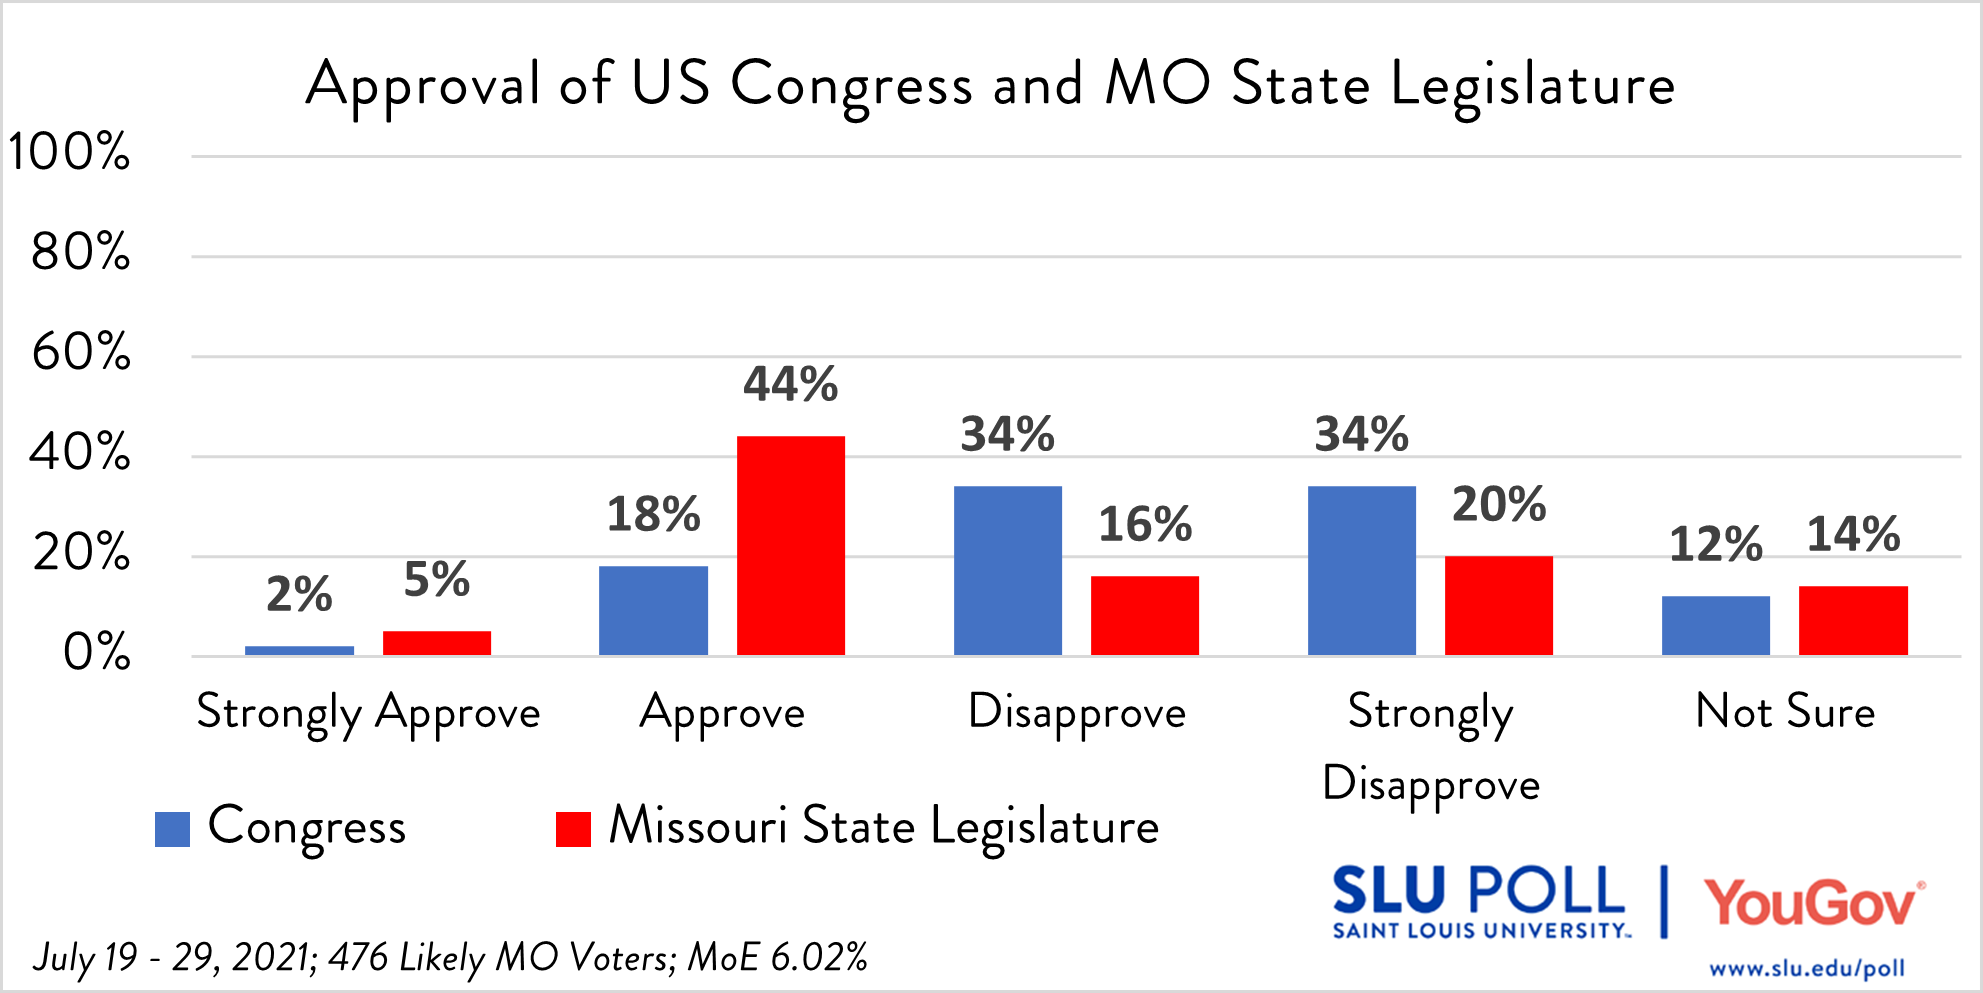 Do you approve or disapprove of the way each is doing their job… The US Congress?  - Strongly Approve: 2% - Approve: 18% - Disapprove: 34% - Strongly Disapprove: 34%  - Not Sure: 12%   Do you approve or disapprove of the way each is doing their job…The Missouri State Legislature?  - Strongly Approve: 5% - Approve: 44% - Disapprove: 16% - Strongly Disapprove: 20%  - Not Sure: 14%